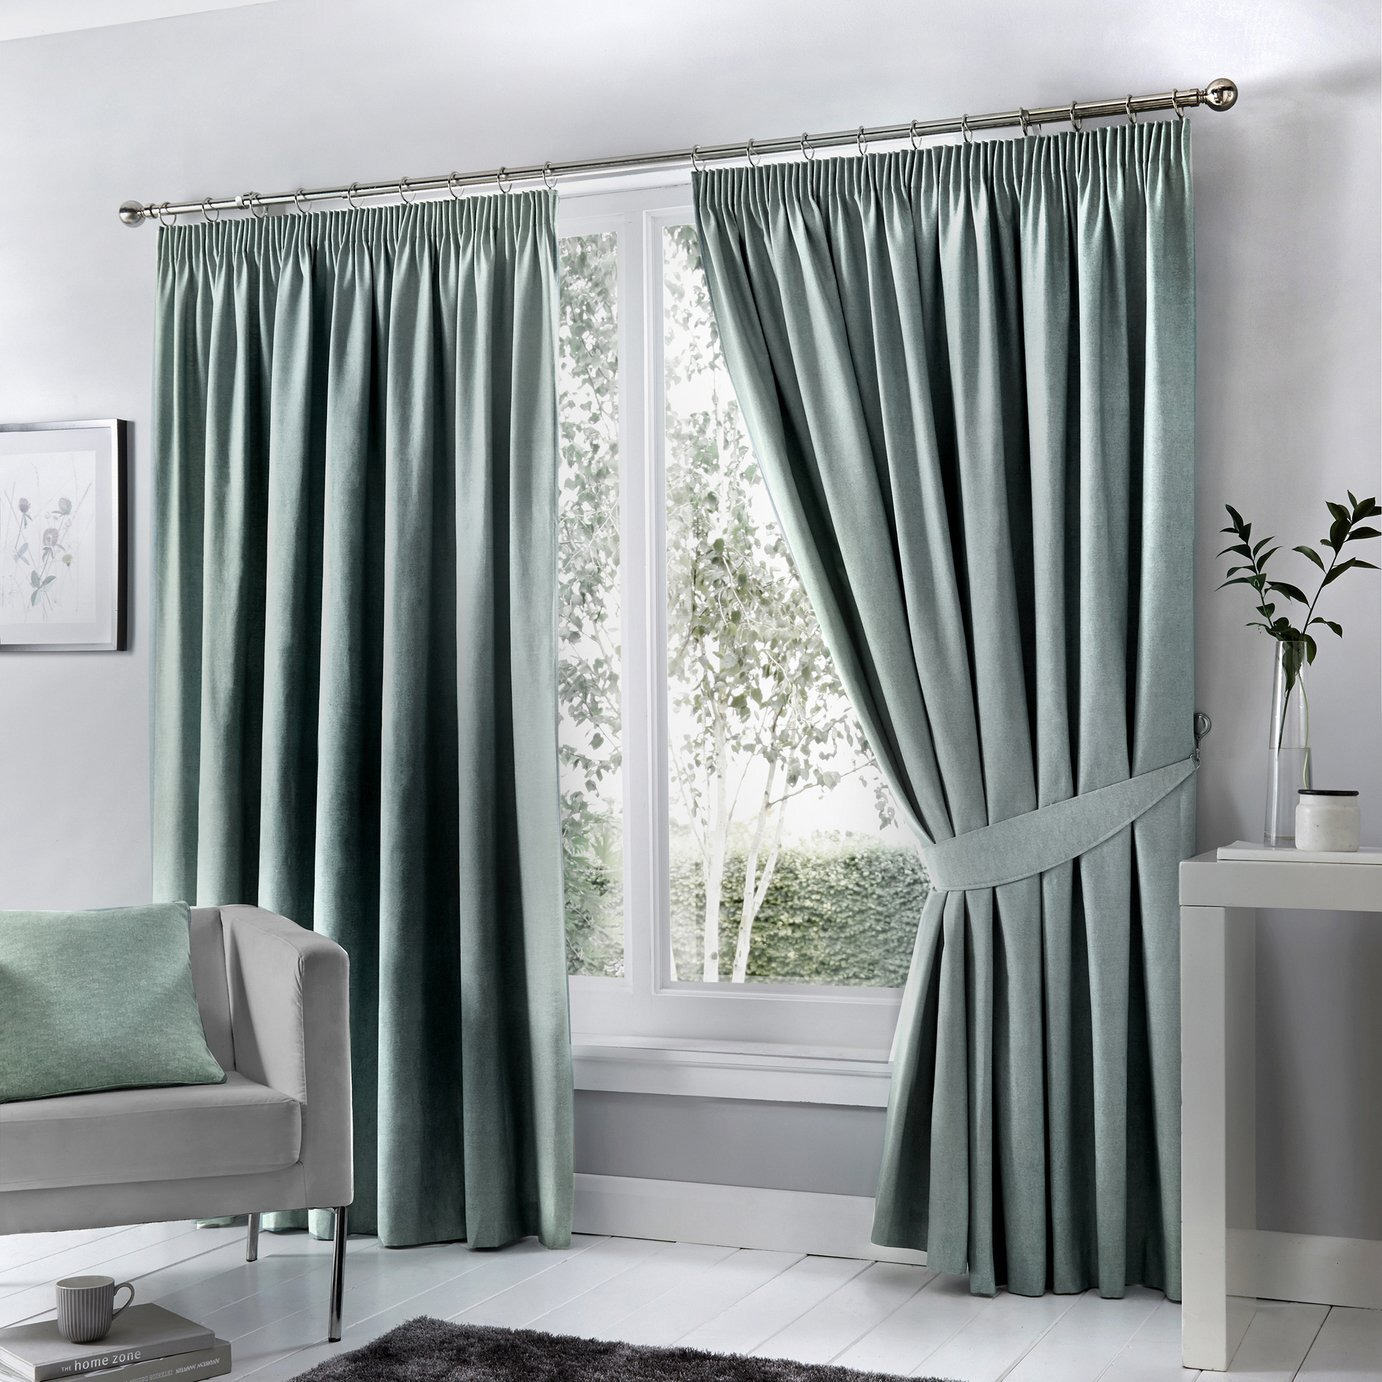 Fusion Dijon Blackout Thermal Lined Curtains - Duck Egg - image 1